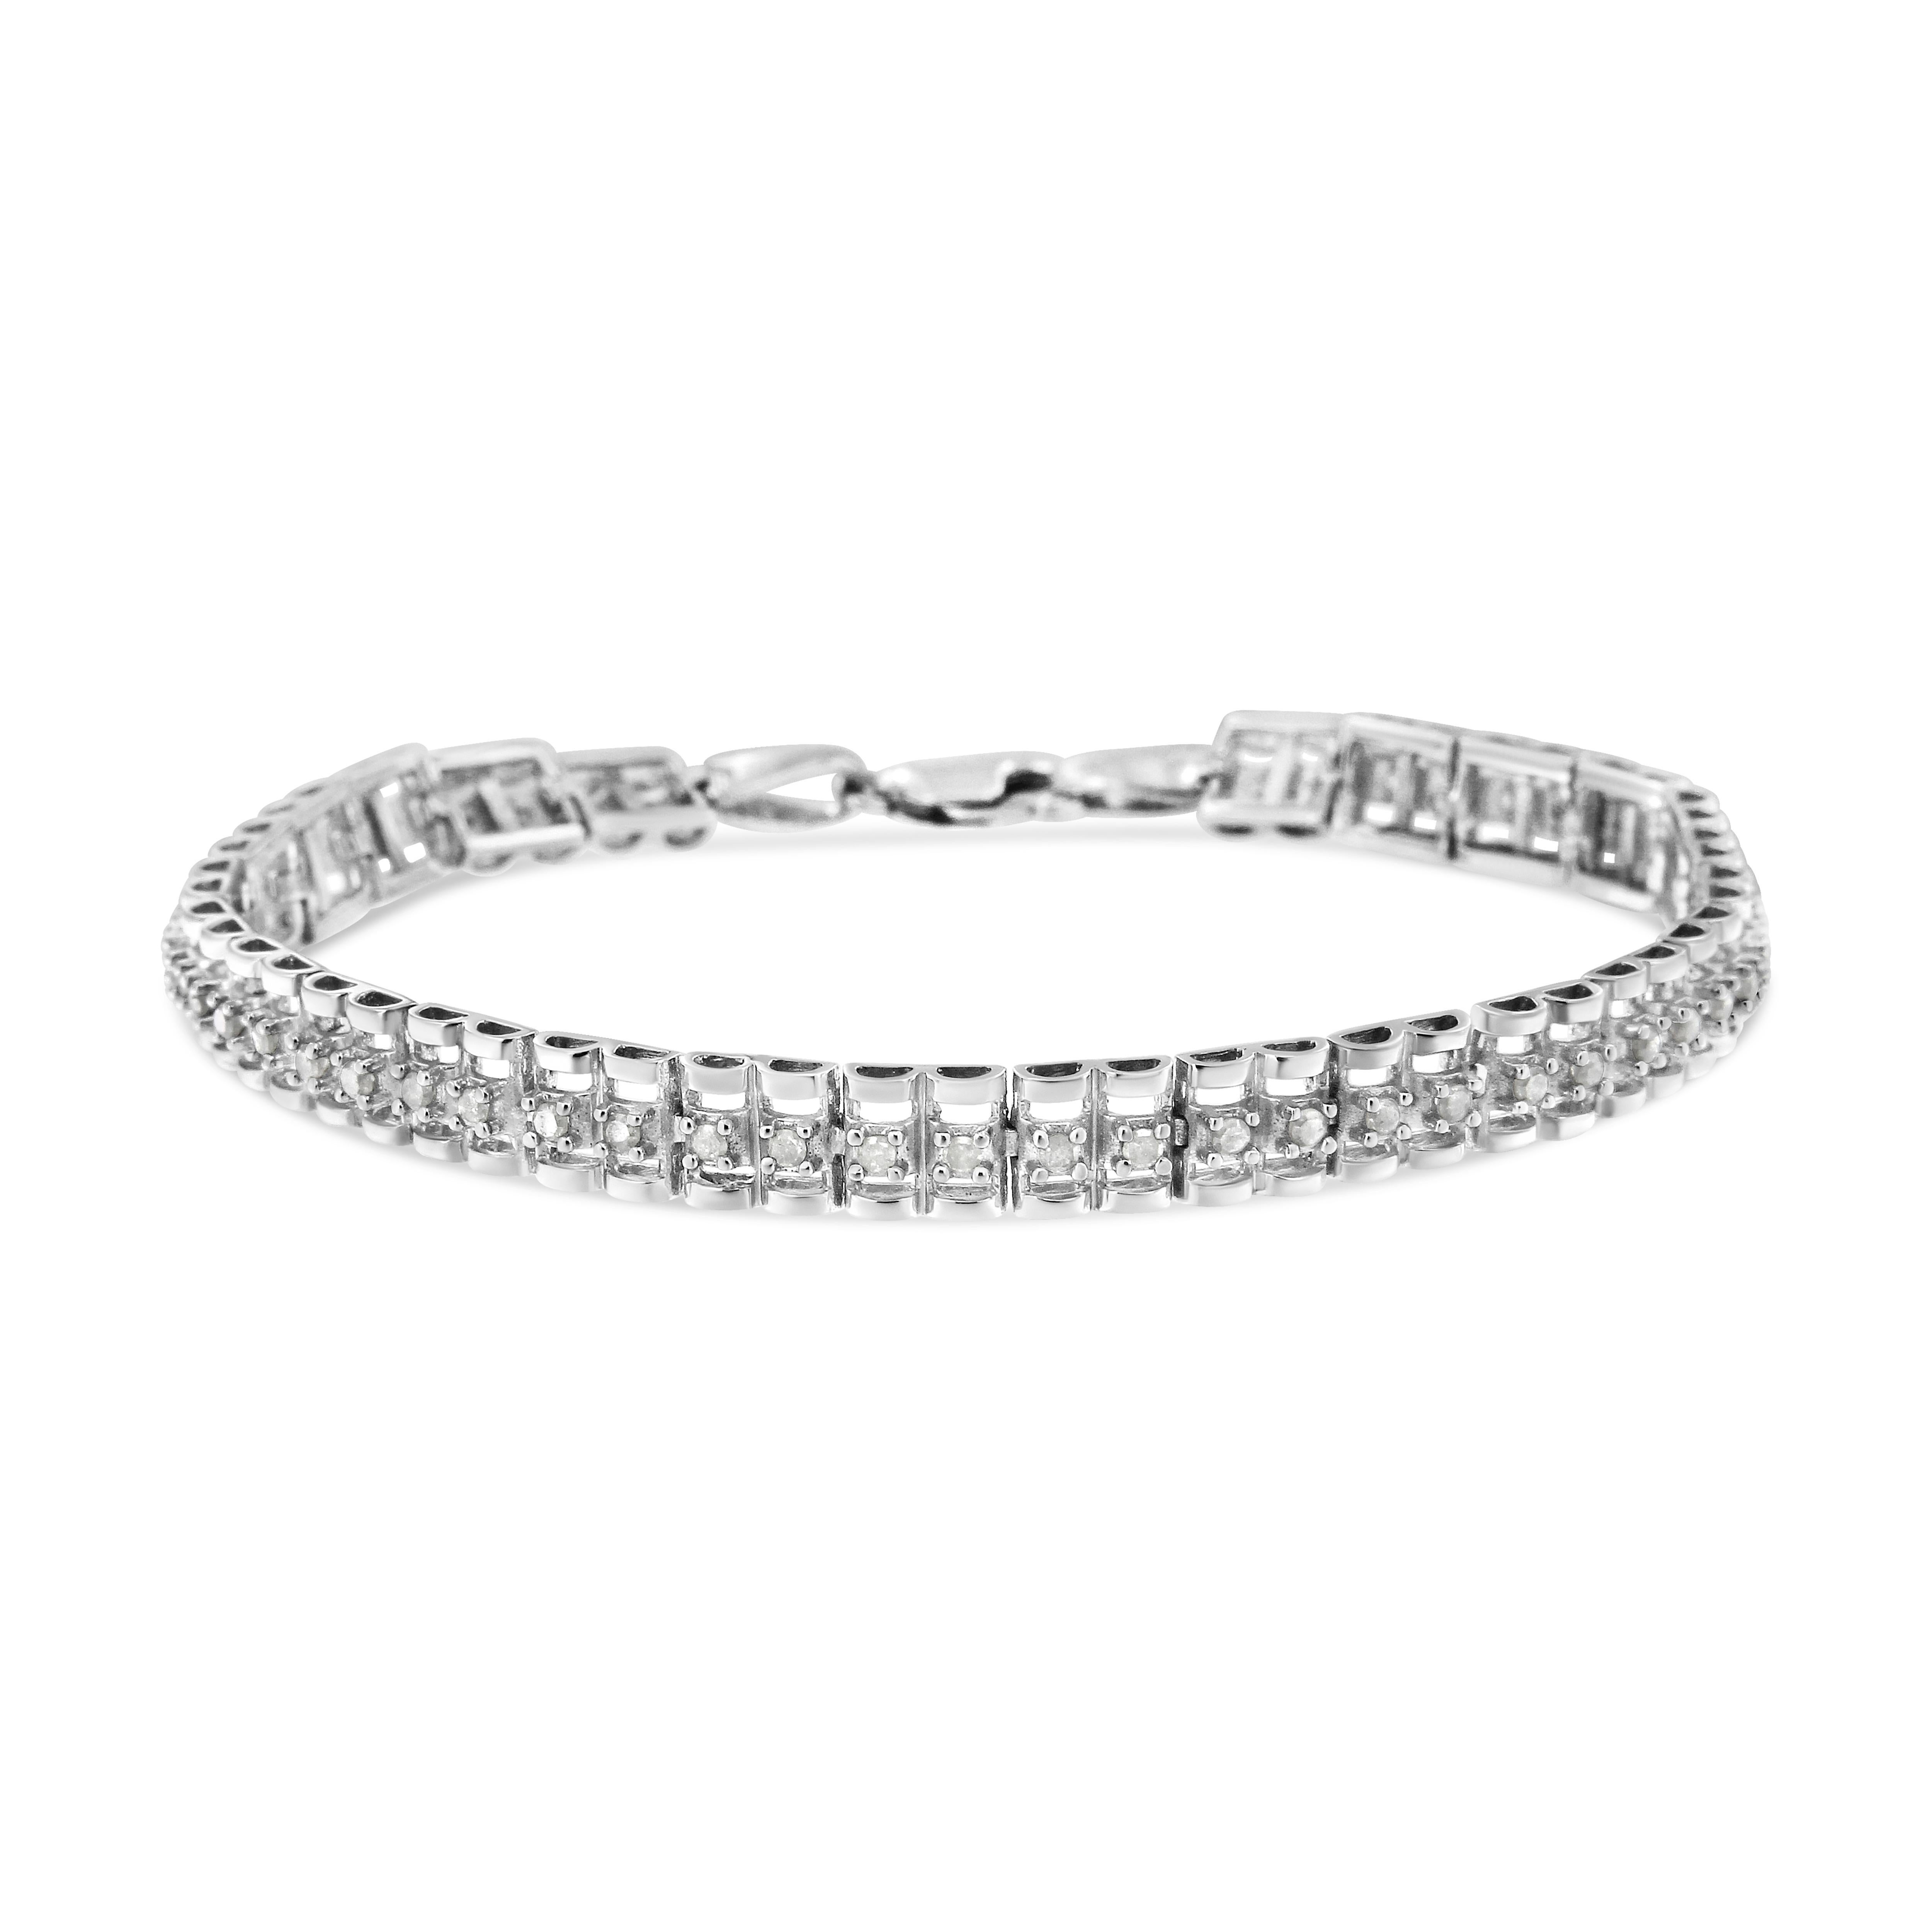 This gorgeous .925 sterling silver tennis bracelet features 0.50 carat total weight with 26 round, rose cut diamonds. The tennis bracelet has hinged links with two shapes surrounding two diamonds on each side. Rose-cut, promo quality diamonds are